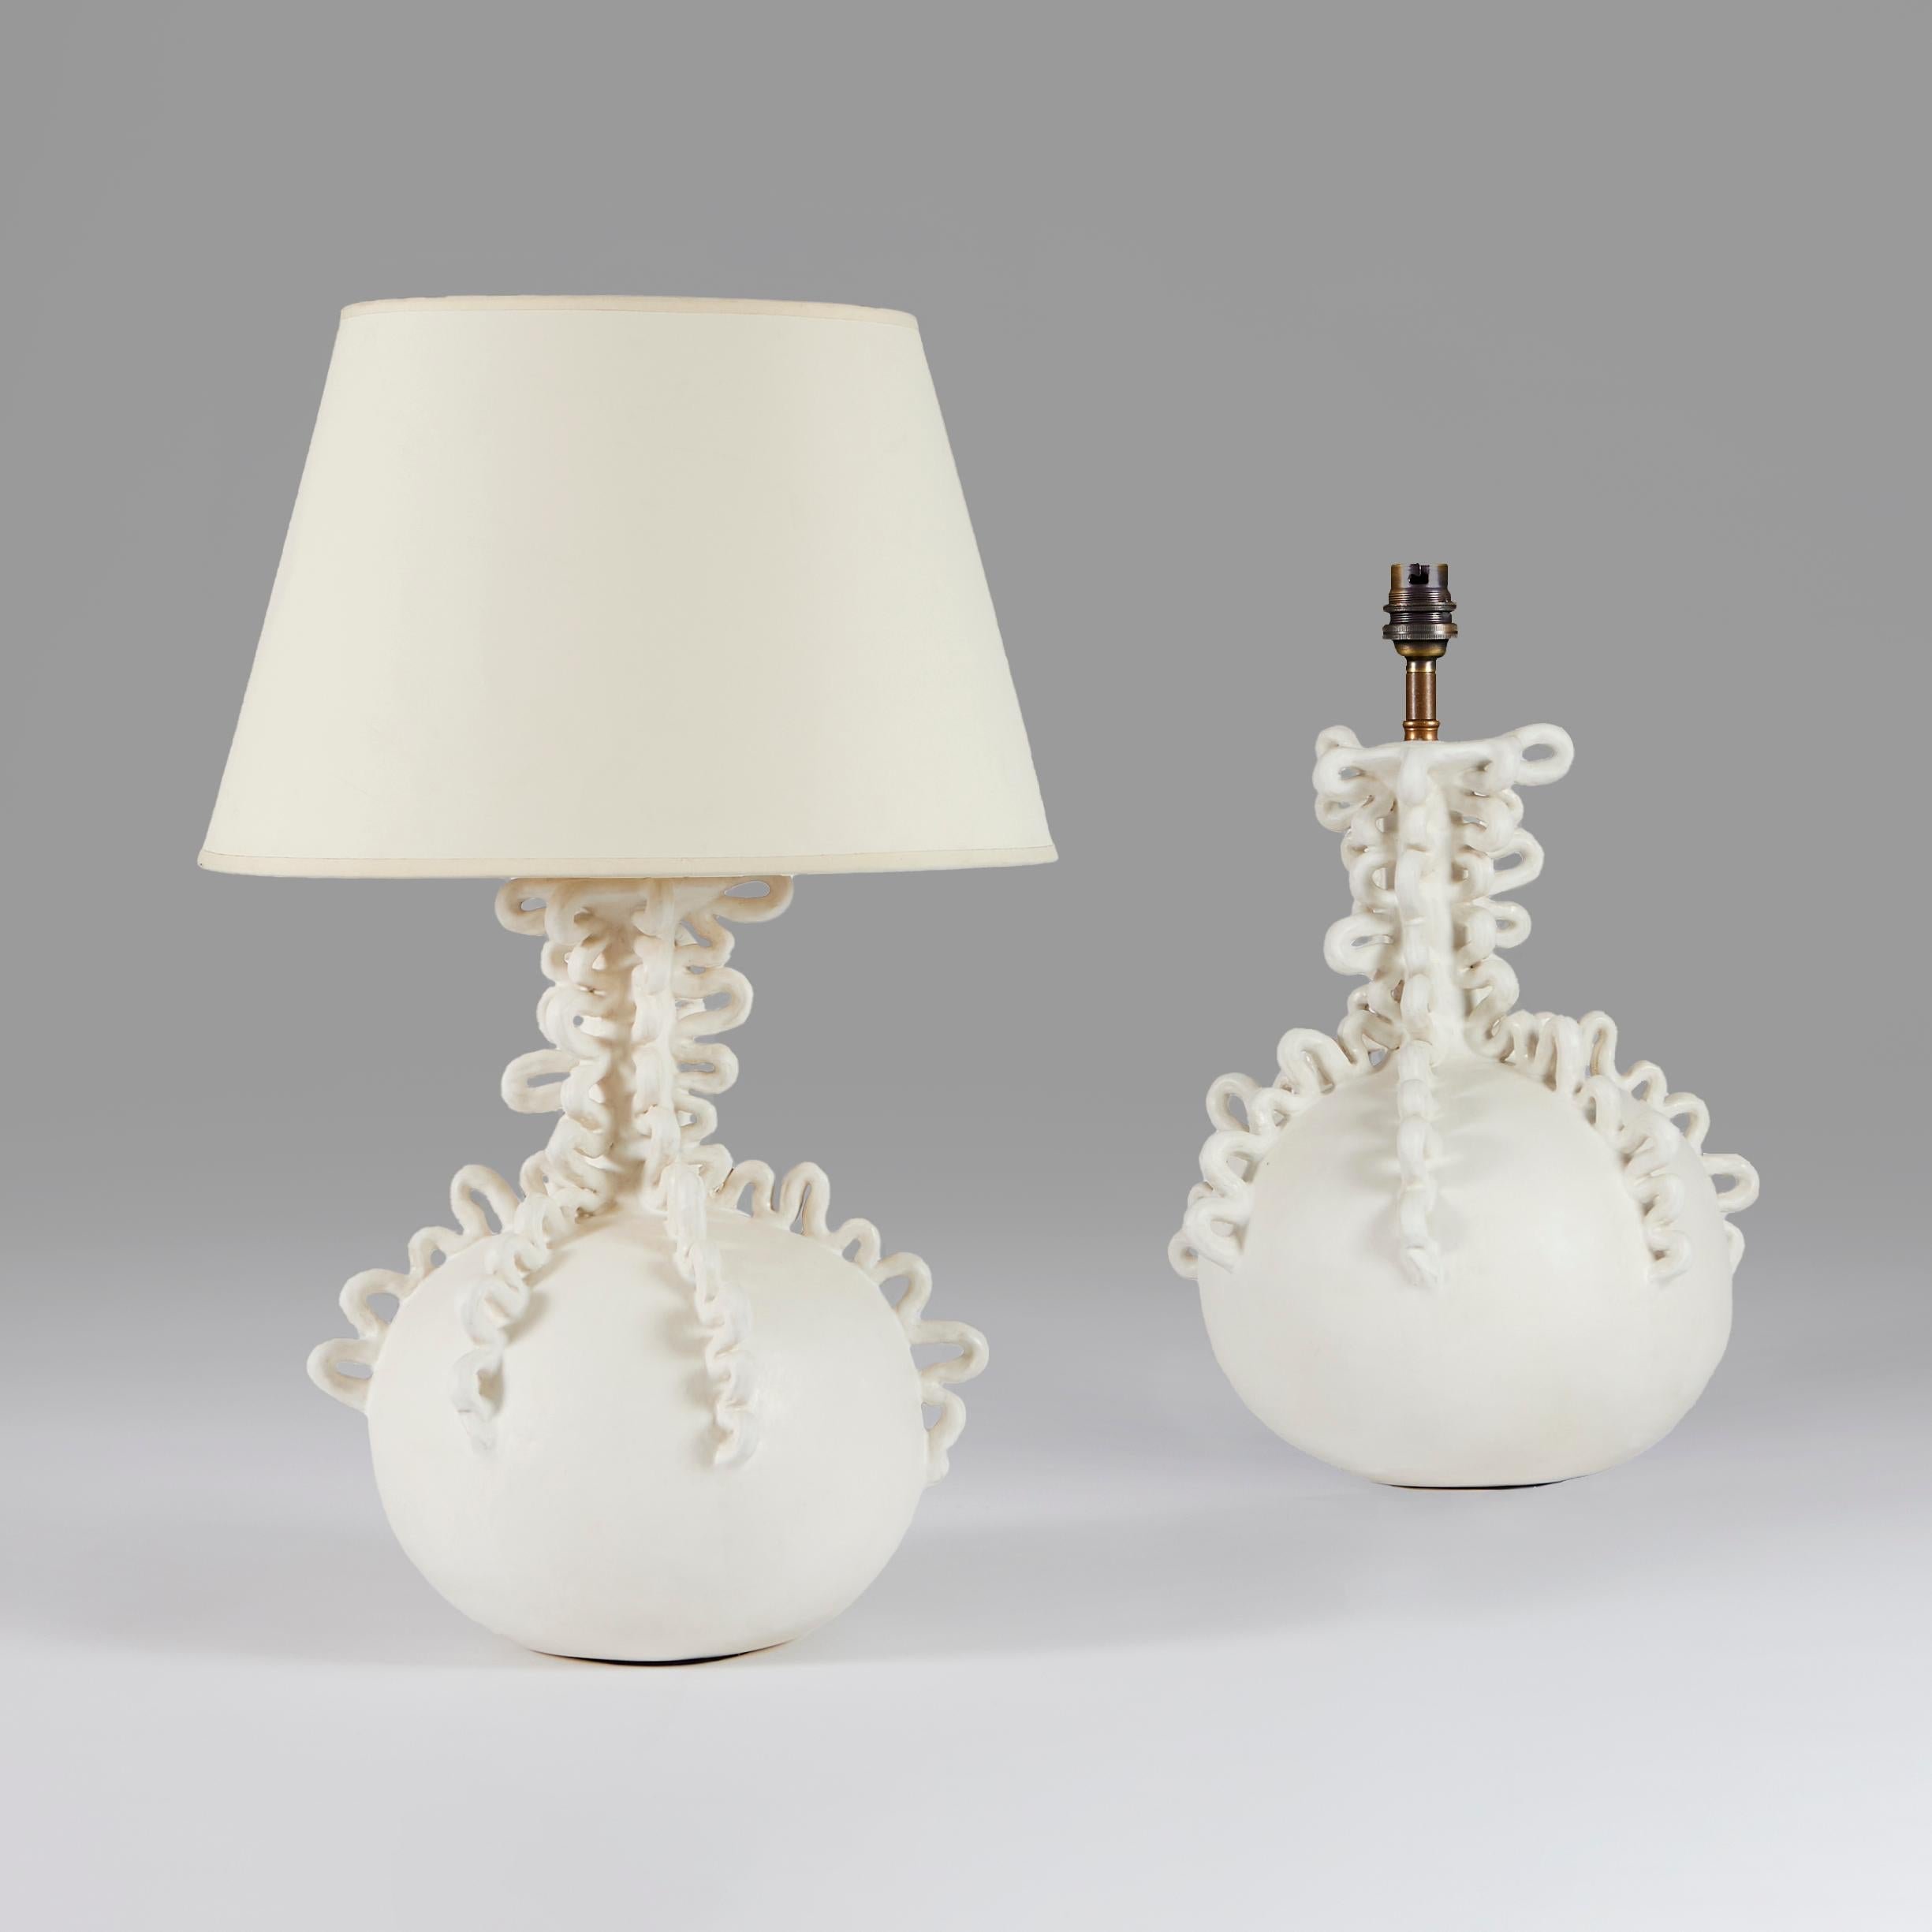 +VAT

England, made to order. 

A pair of abstract stoneware lamps of large globular bottle form with six serpentine trails applied down the neck and finished in a matte white glaze. 

Lead time: 6 - 8 weeks.

Height 44.00cm 
Diameter